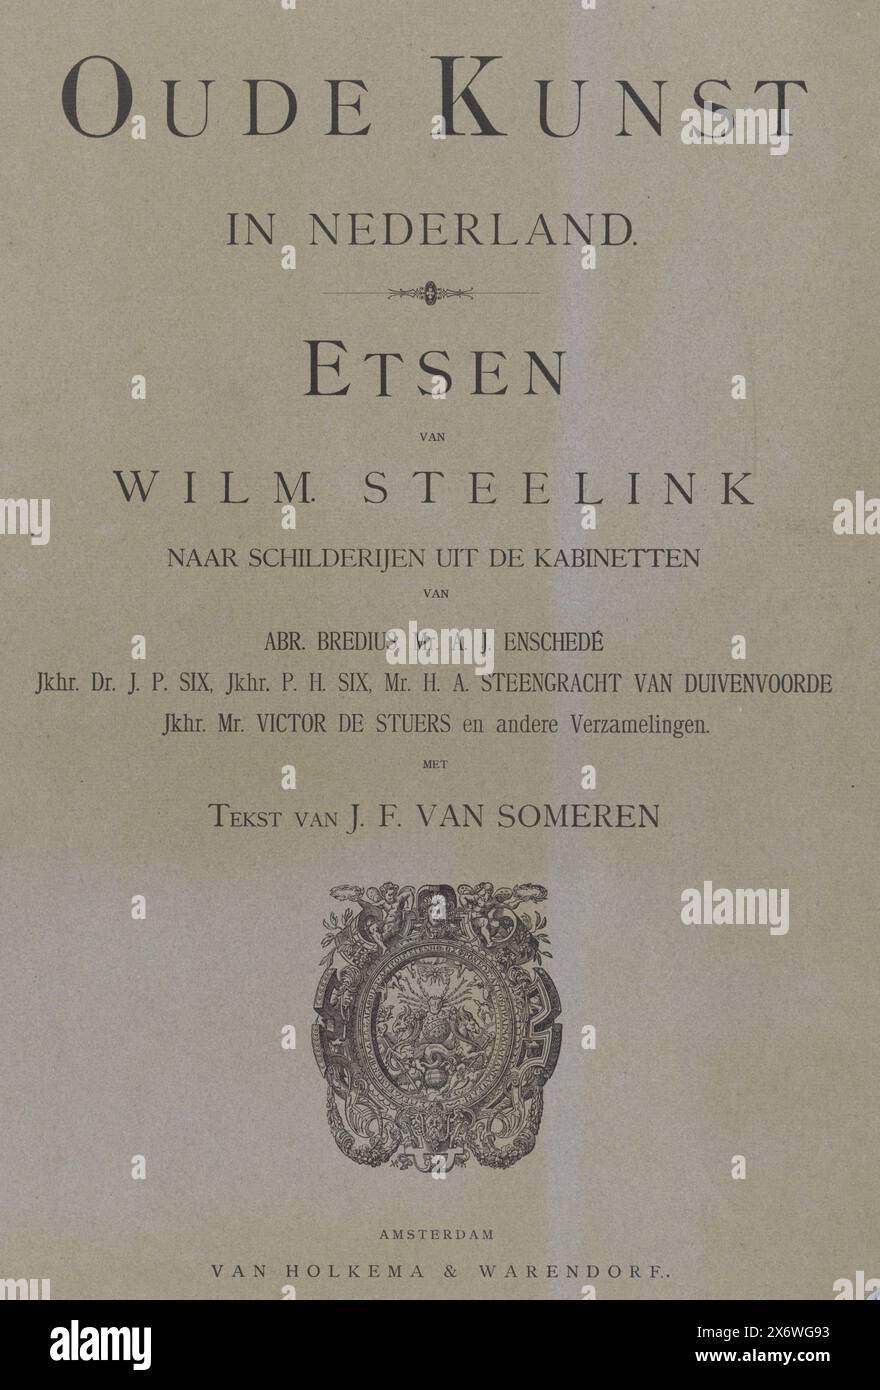 Title page and text page for: J.F. van Someren, Ancient art in the Netherlands: etchings by Wilm. Steelink, after paintings from the cabinets of A. Bredius, A.J. Enschedé, J.P. Six, P.H. Six, H.A. Steengracht van Duivenvoorde, Victor de Stuers and other collections, Amsterdam 1888-1891, Title page and text page for: J.F. van Someren, Ancient art in the Netherlands: etchings by Wilm. Steelink, after paintings from the cabinets of A. Bredius, A.J. Enschedé, J.P. Six, P.H. Siz, H.A. Steengracht van Duivenvoorde, Victor de Stuers and other collections, Amsterdam 1888-1891. With a reproduction Stock Photo